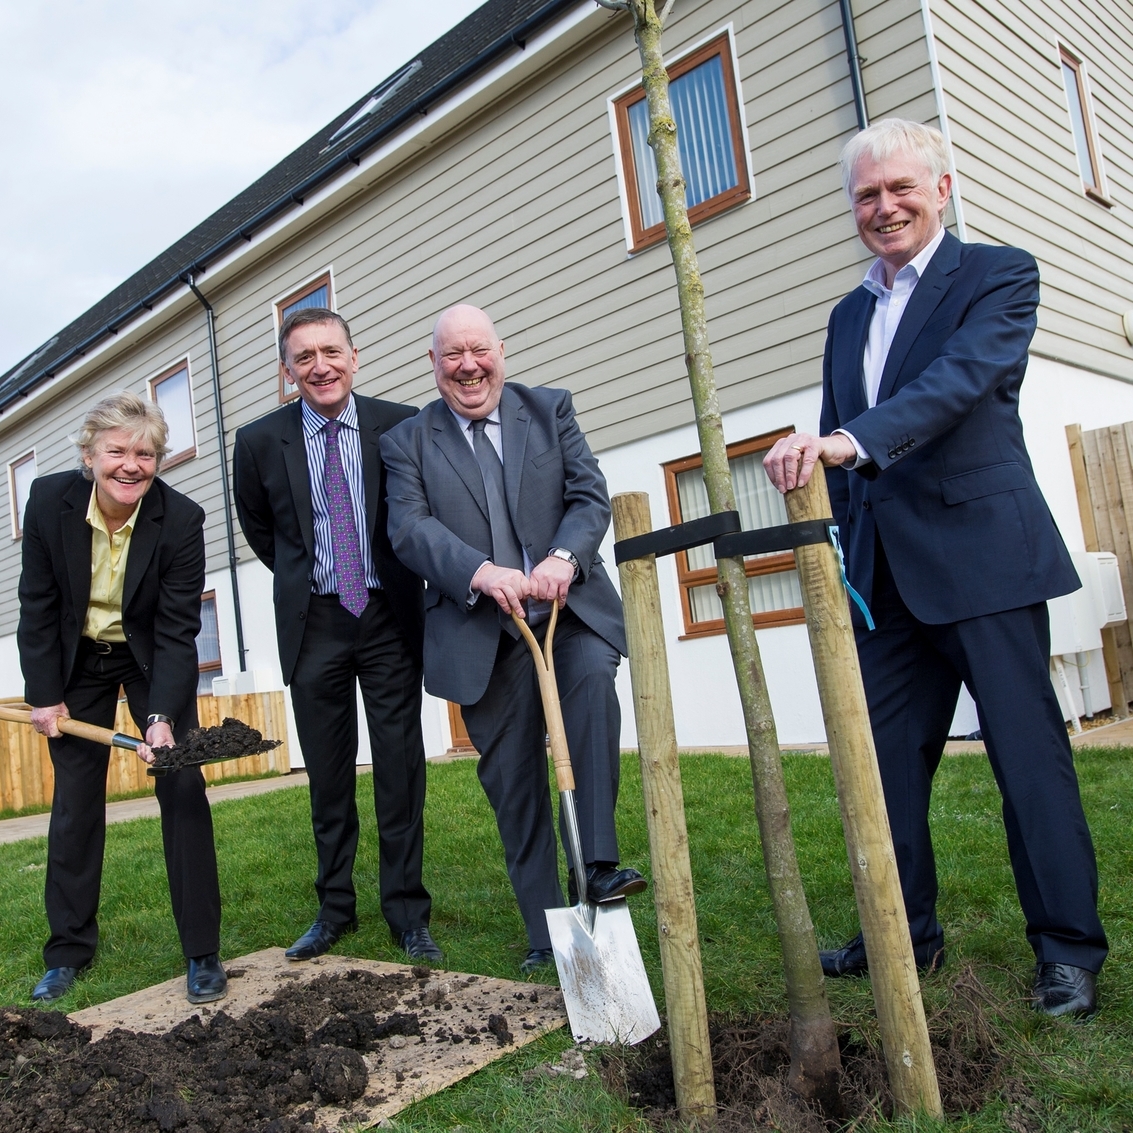  Planting one of the trees donated by the Mersey Forest, l-r, Liza Parry, chief executive of HPBC, Ian McDermott, Sanctuary’s chief operating officer, Mayor Joe Anderson and Jim Gill, trustee, HPBC. 